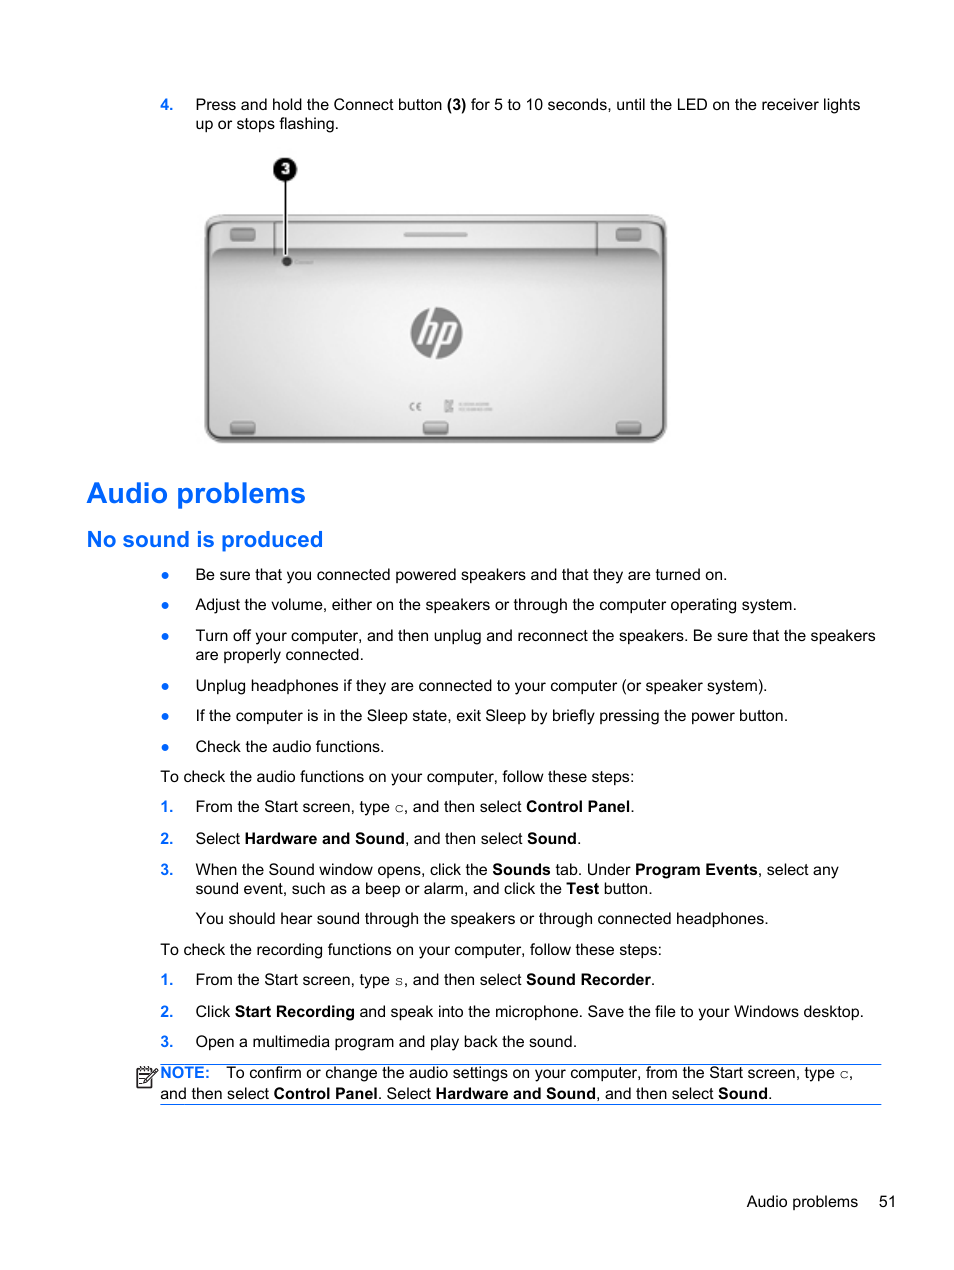 Audio problems, No sound is produced | HP ENVY Rove 20-k121us Mobile  All-in-One Desktop PC User Manual | Page 59 / 65